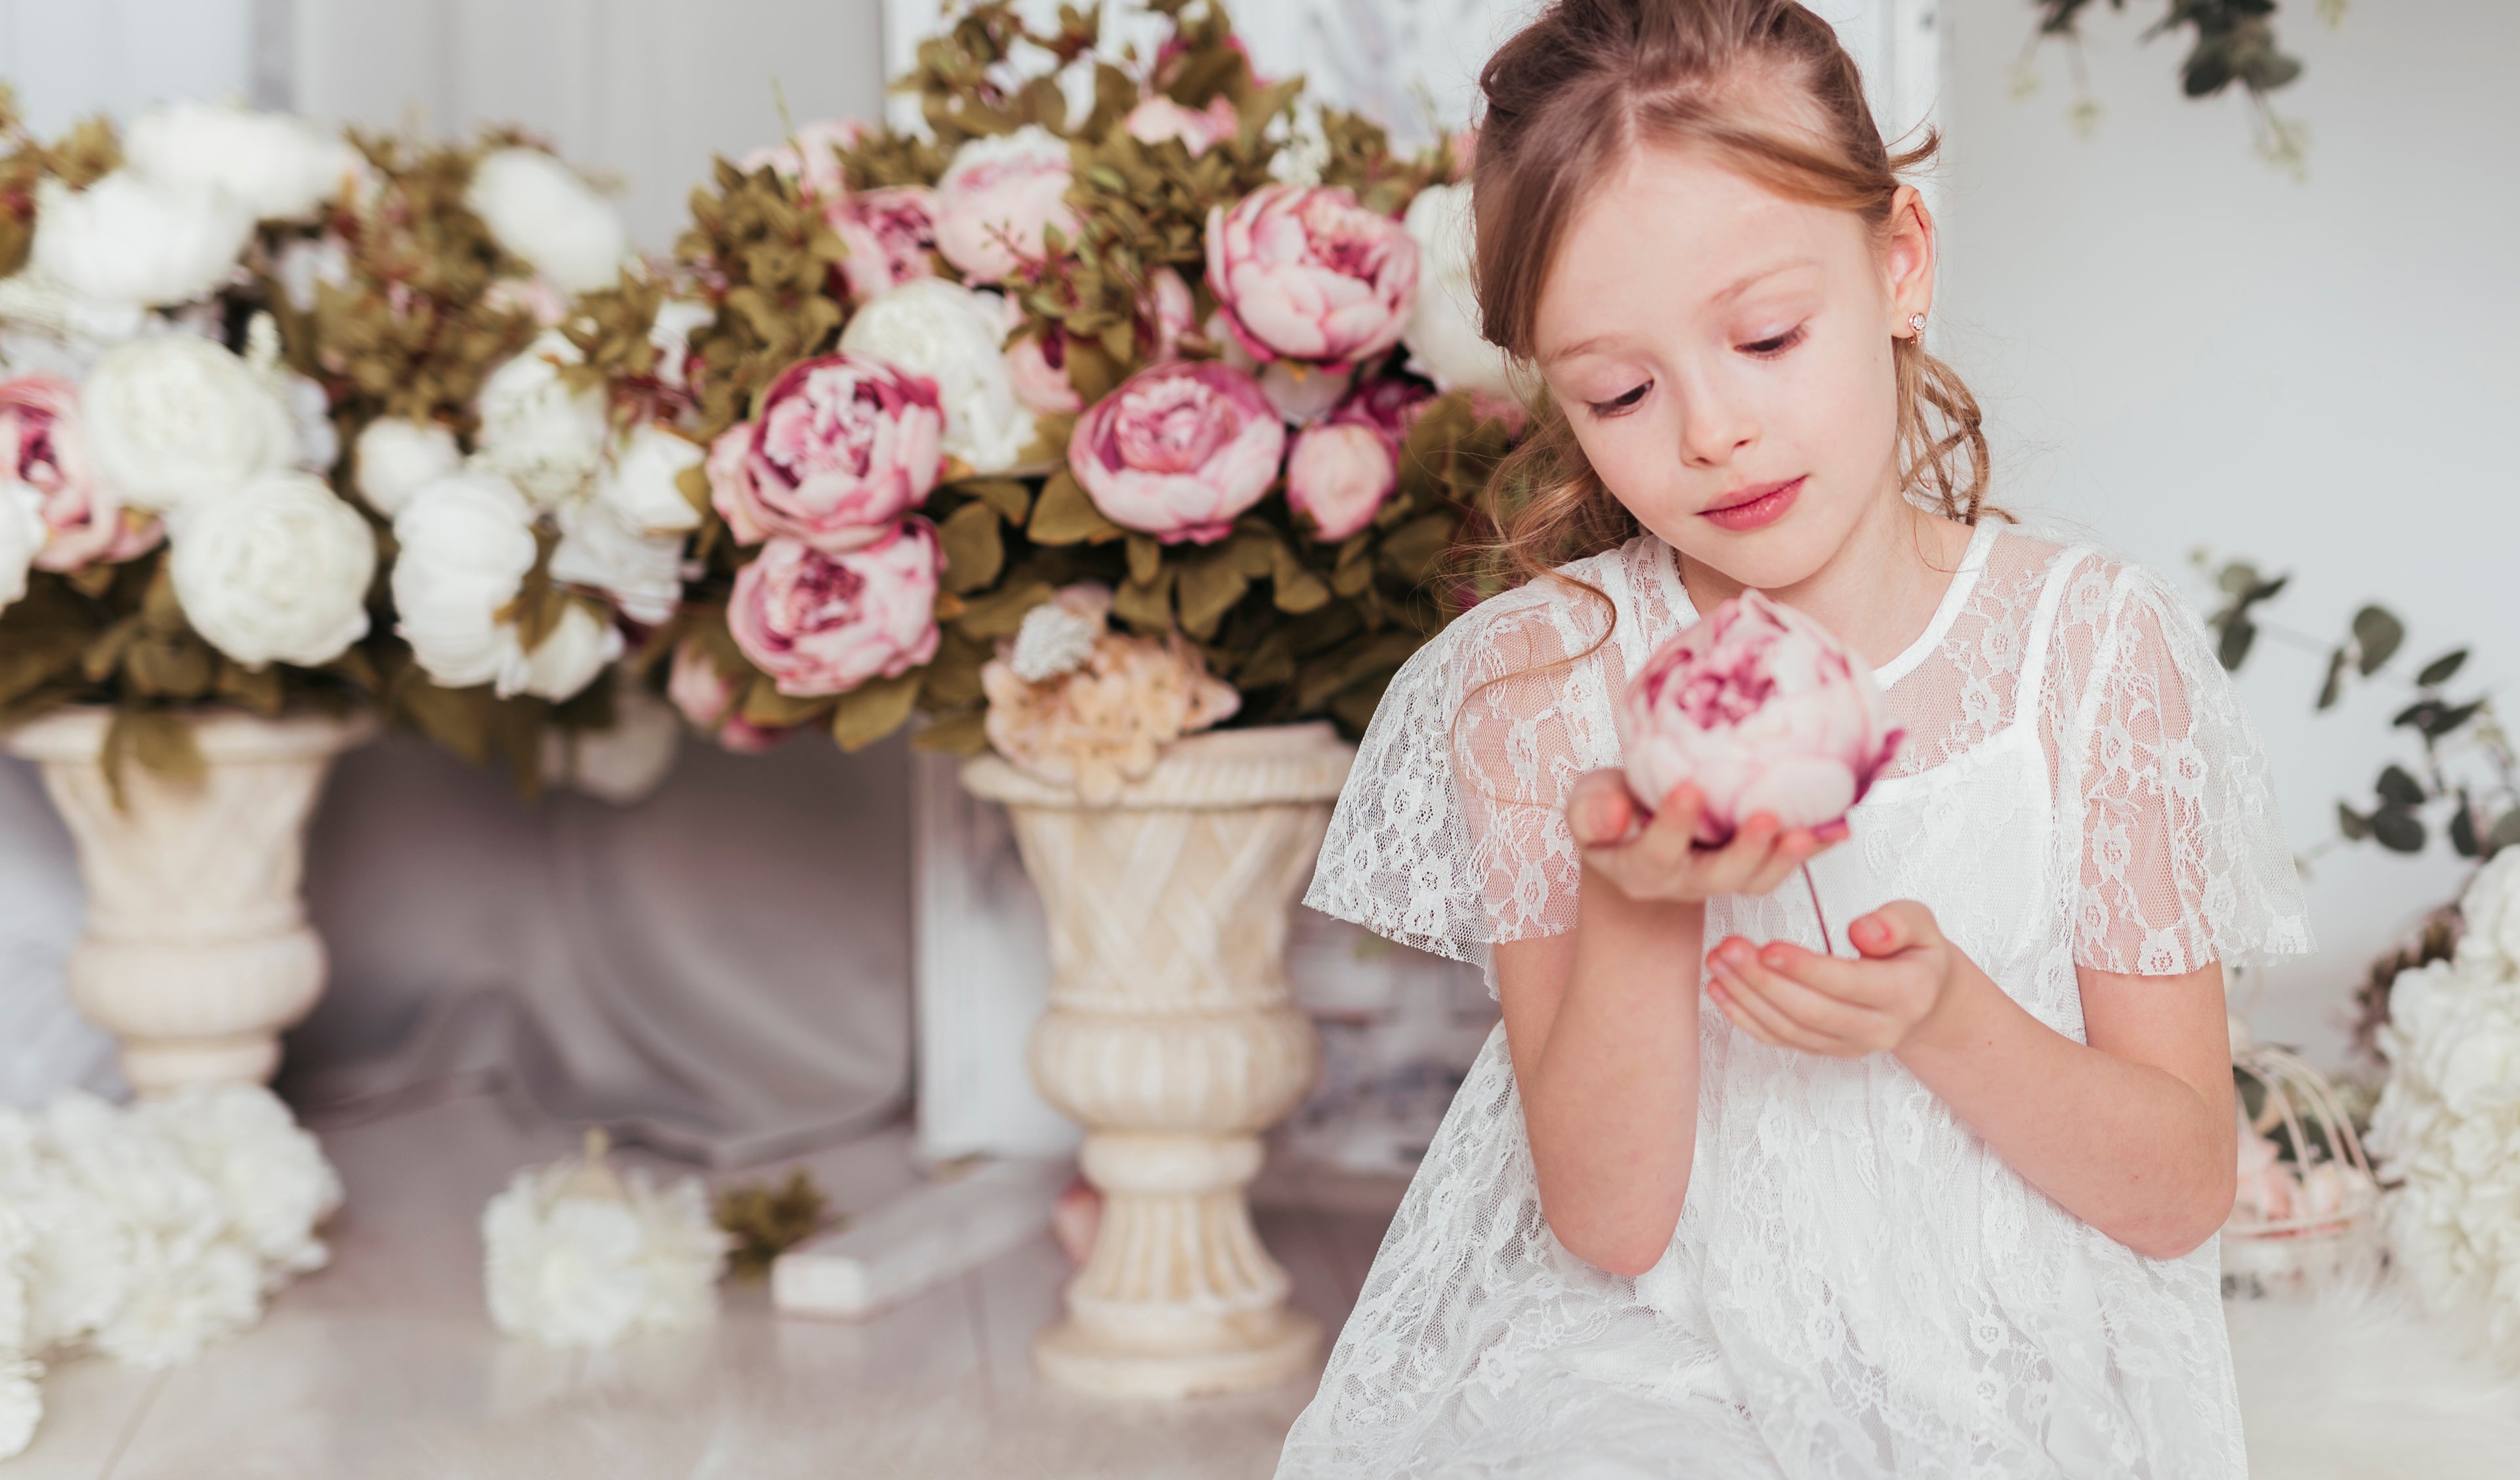 image of a young girl celebrating her first holy communion